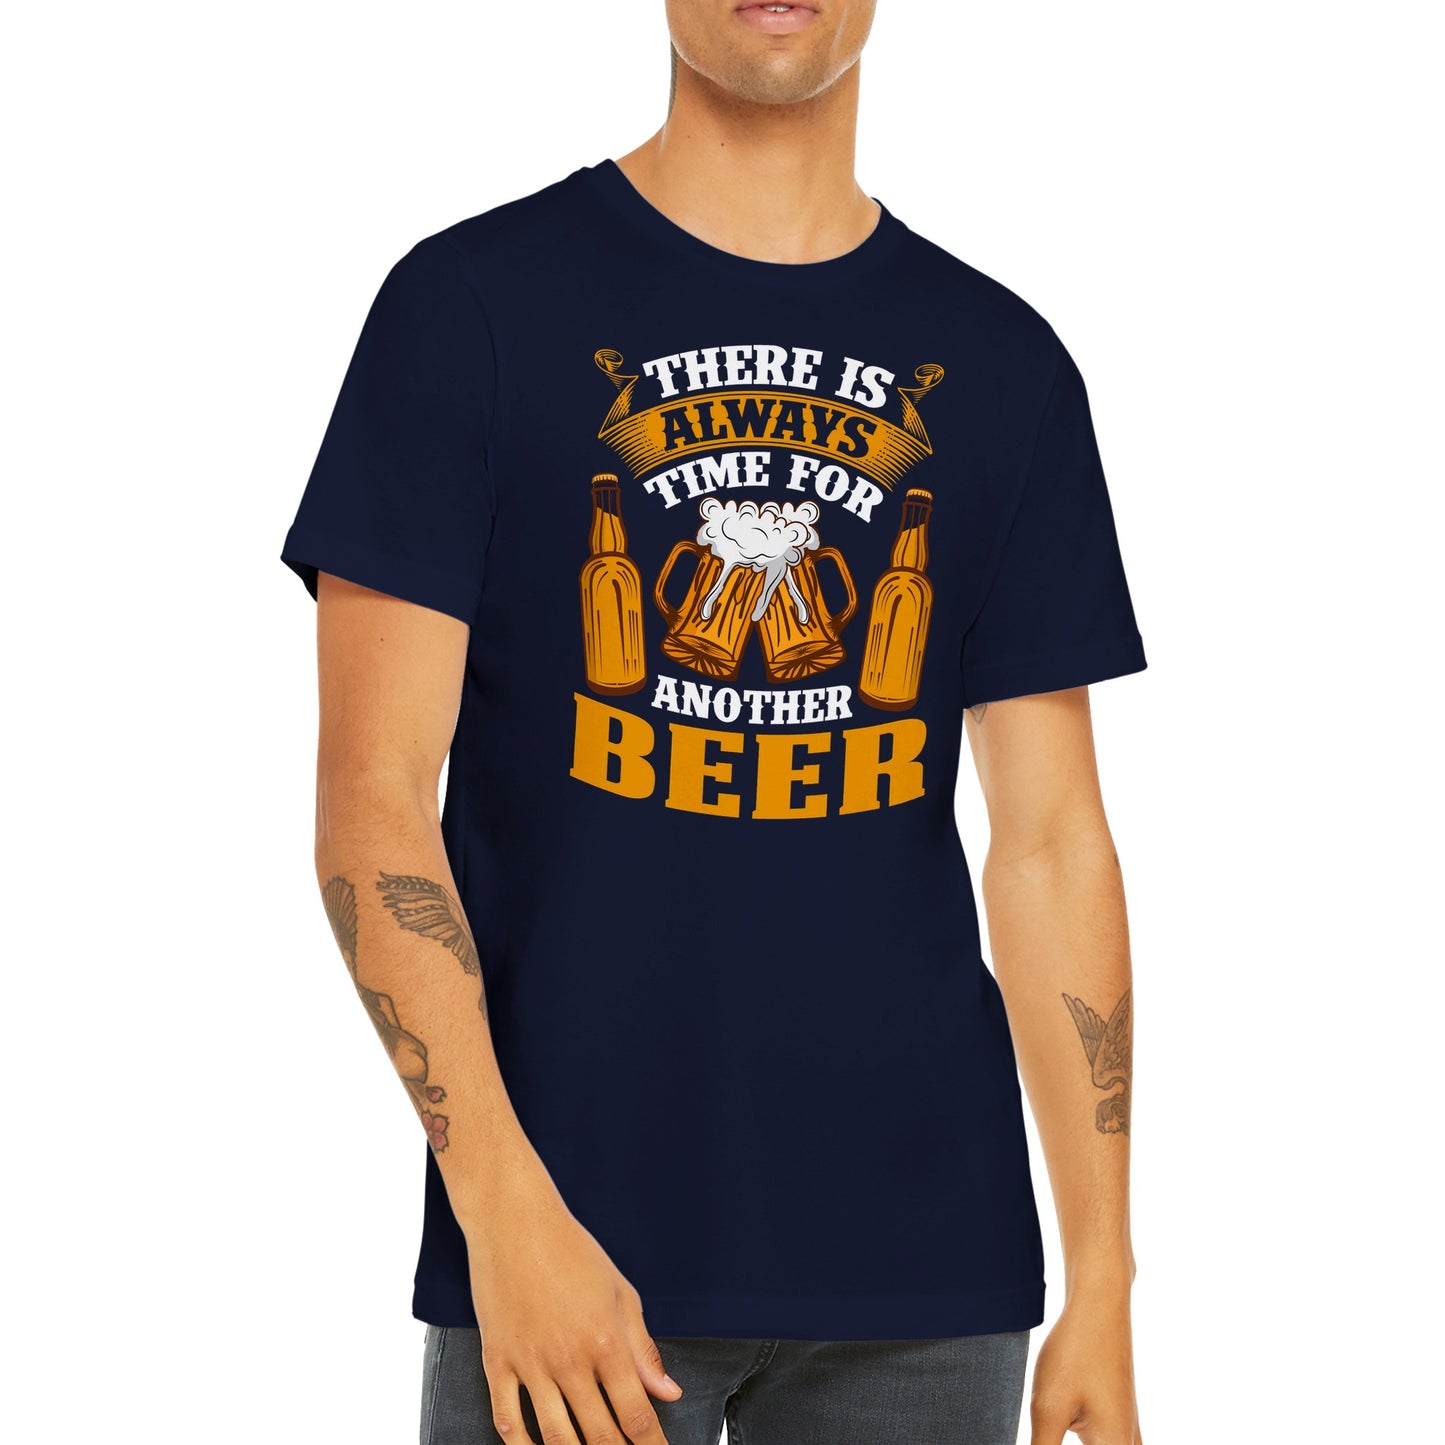 Sjove T-shirts - There Is Always Time For Another Beer - Premium Unisex T-shirt